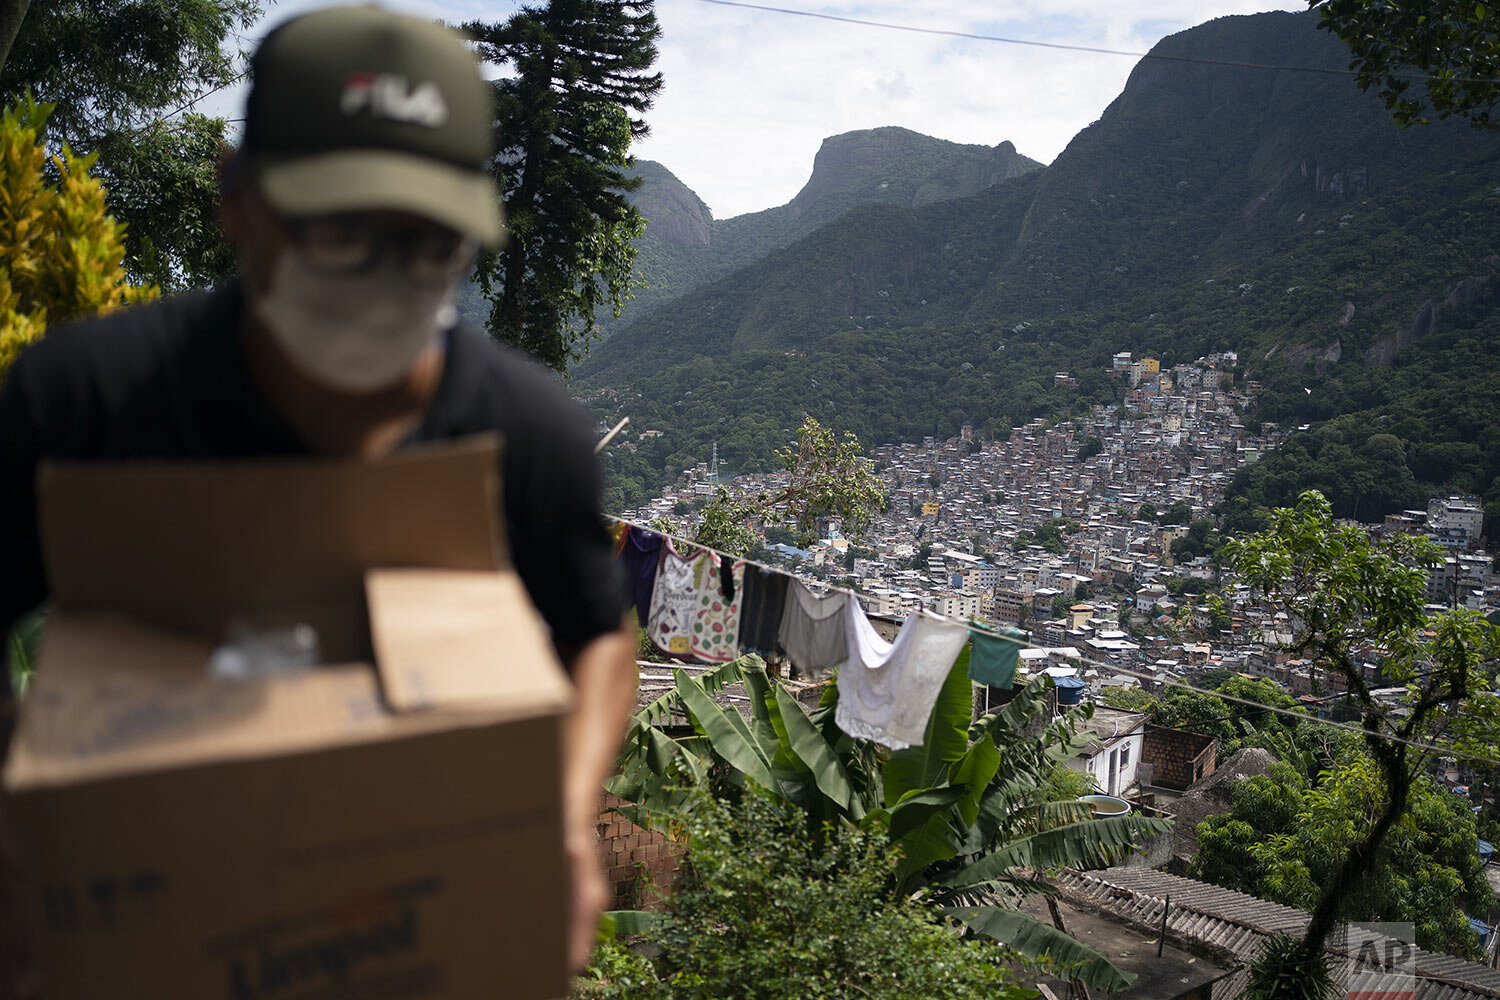  A local volunteer carries a package with soap and detergent to be distributed to residents in an effort to curb the spread of the new coronavirus, in the Rocinha favela of Rio de Janeiro, Brazil, March 24, 2020. (AP Photo/Leo Correa) 